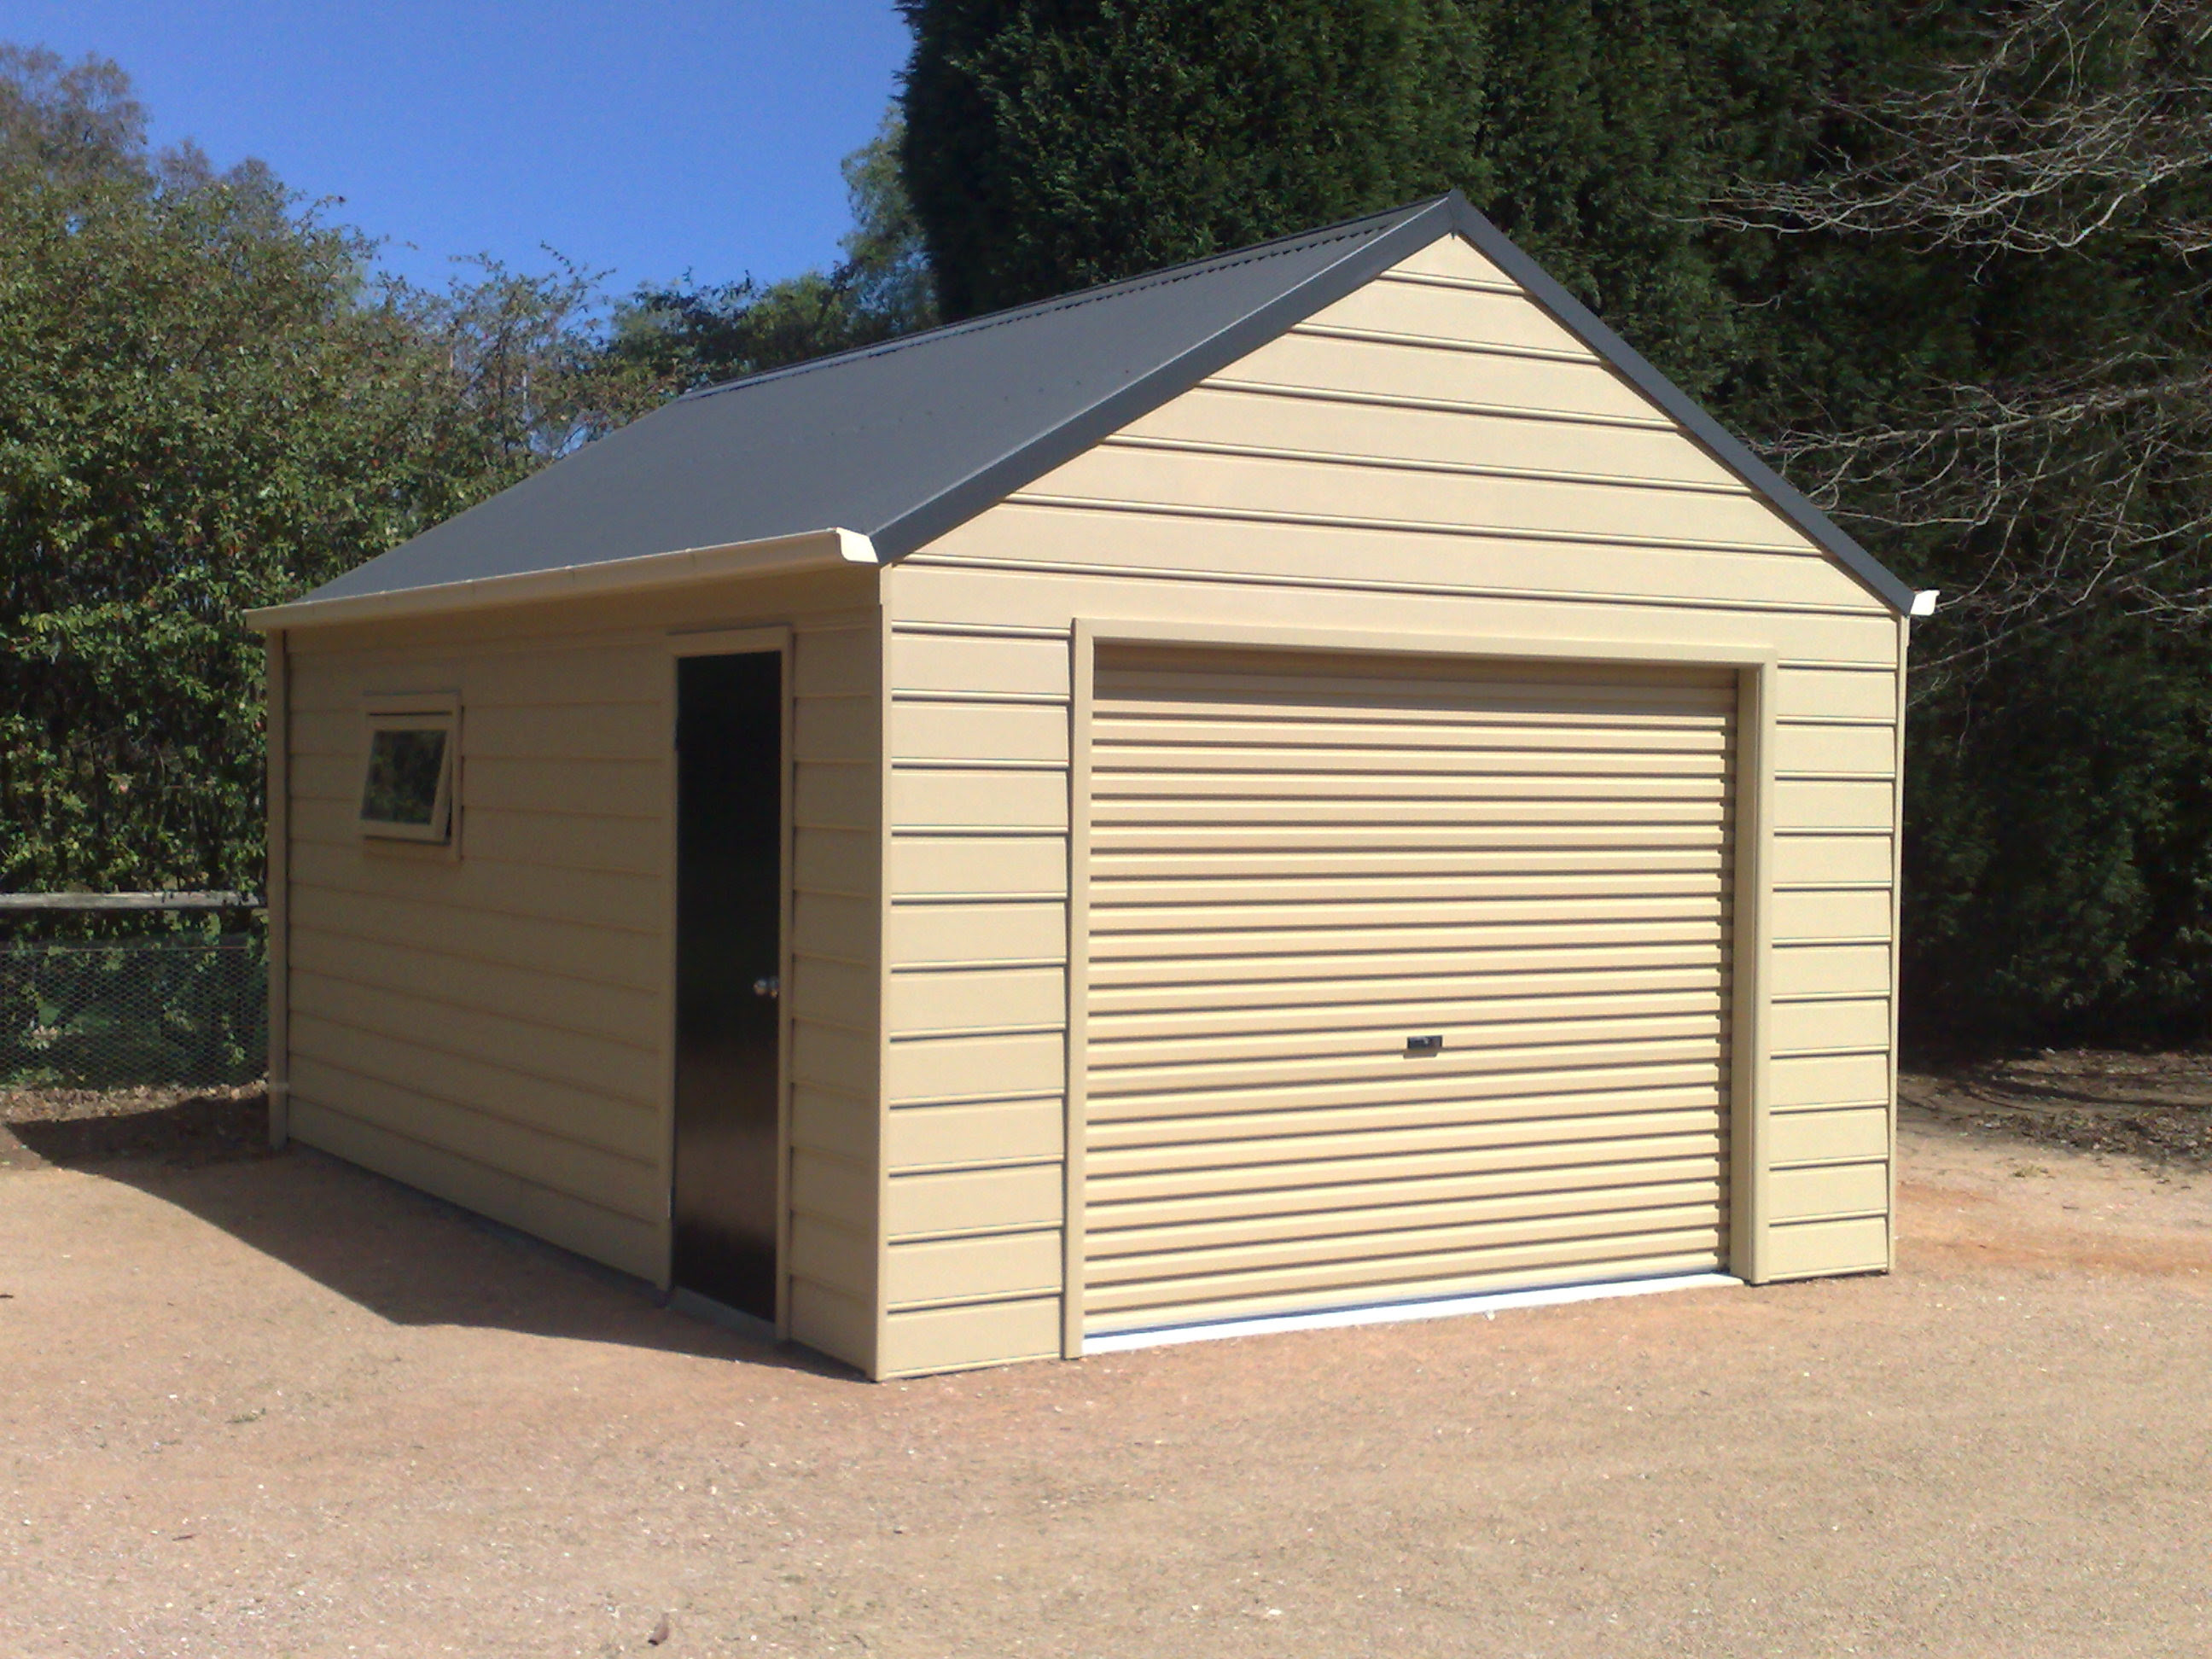 compare 2019 average shed price quotes - how much does it